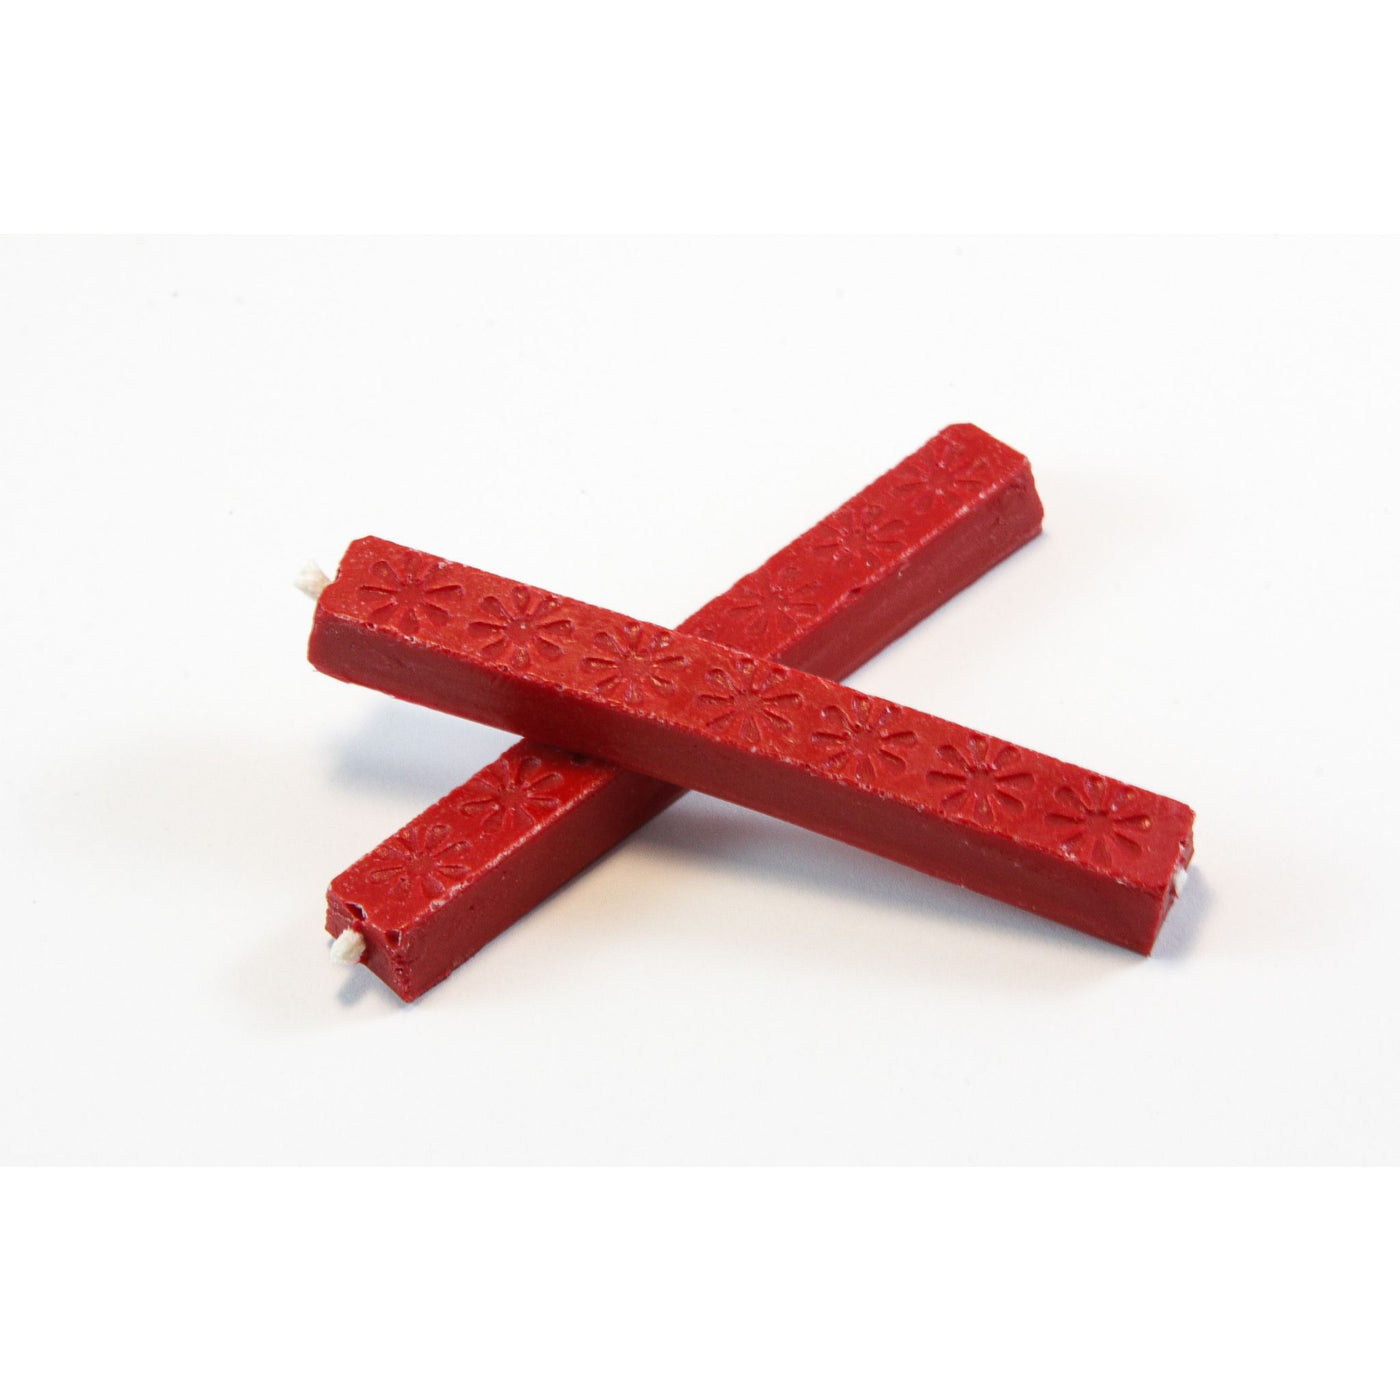 Large Sealing Wax Stick - Red | Atlas Stationers.